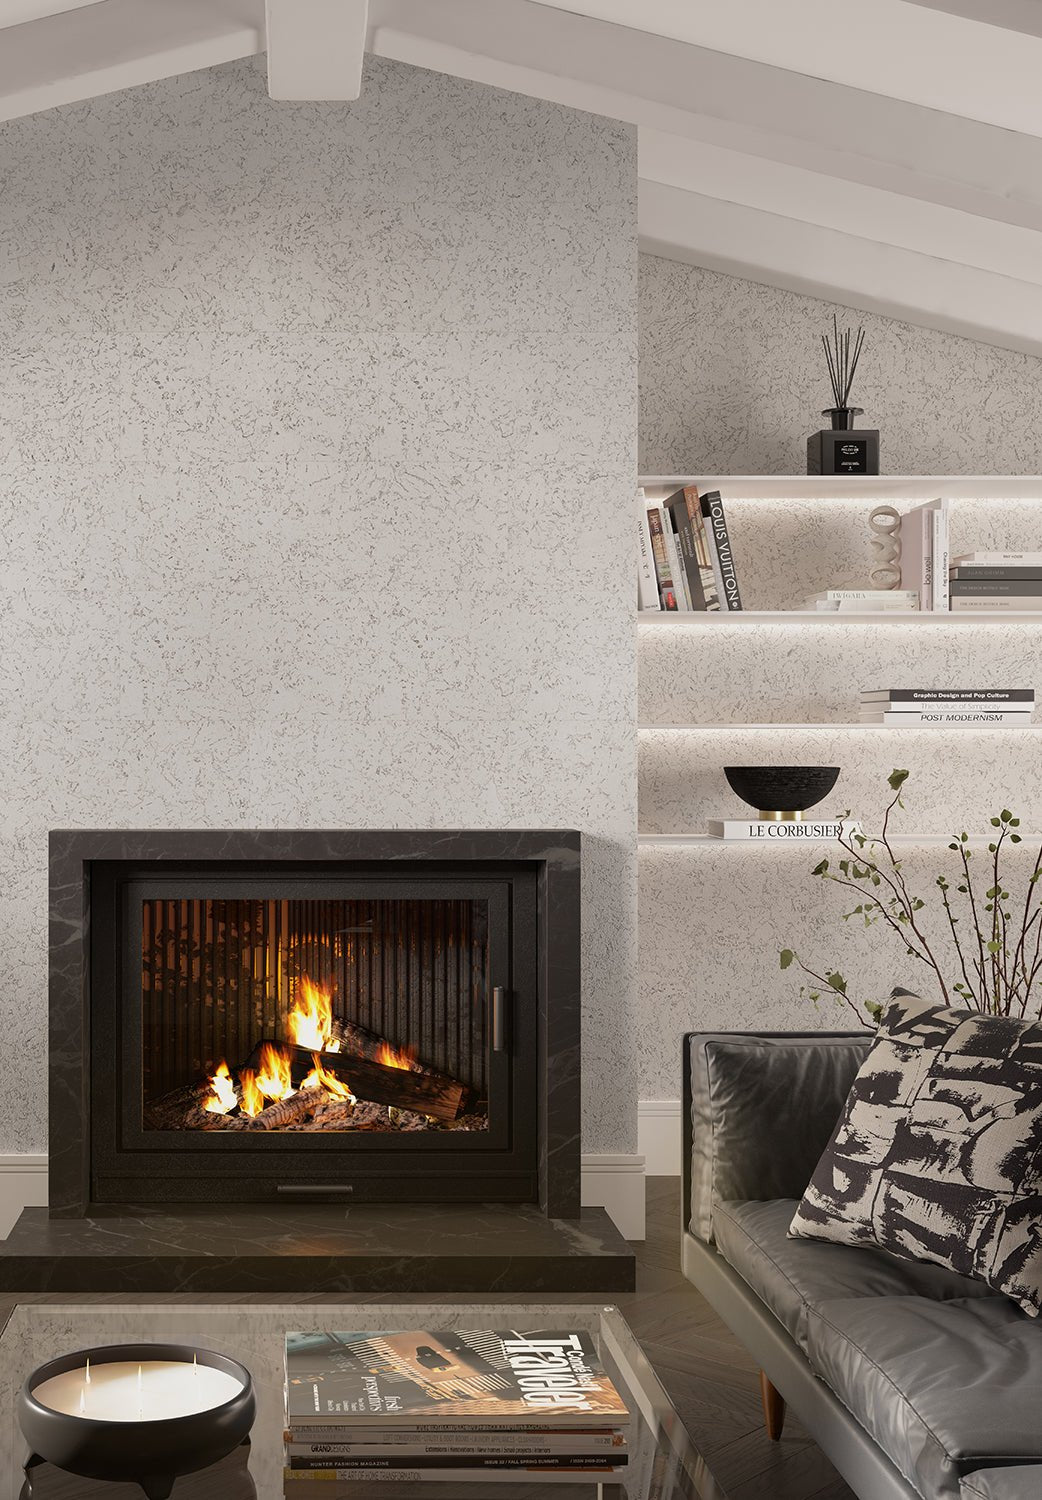 CorkWall Lagos White on the wall. Black marble fireplace and white shelving in alcove.